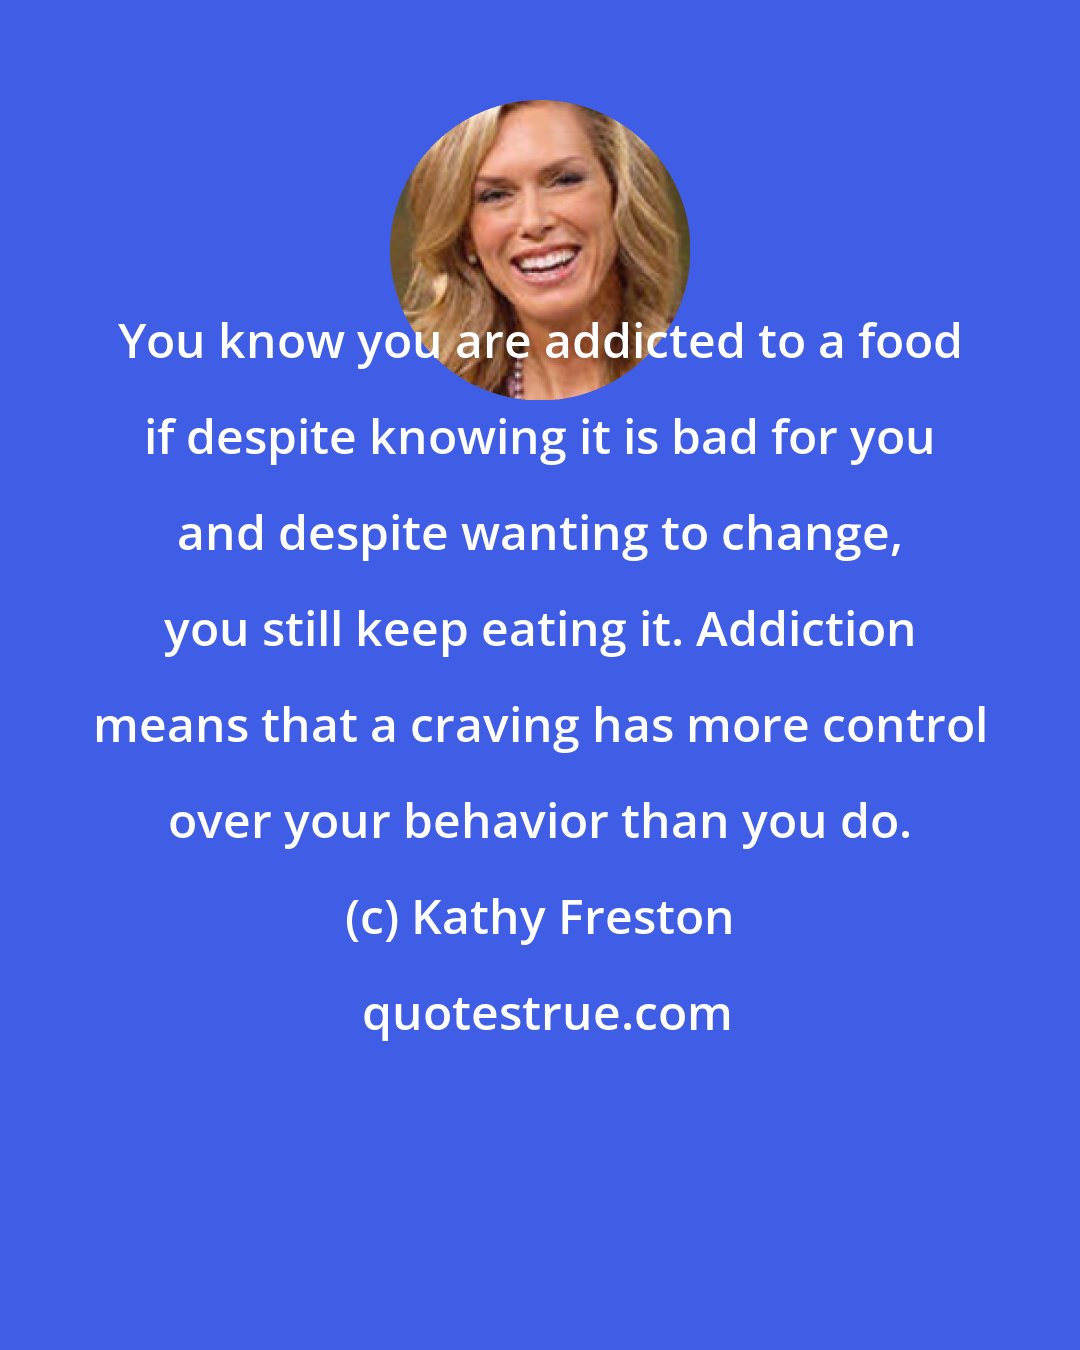 Kathy Freston: You know you are addicted to a food if despite knowing it is bad for you and despite wanting to change, you still keep eating it. Addiction means that a craving has more control over your behavior than you do.